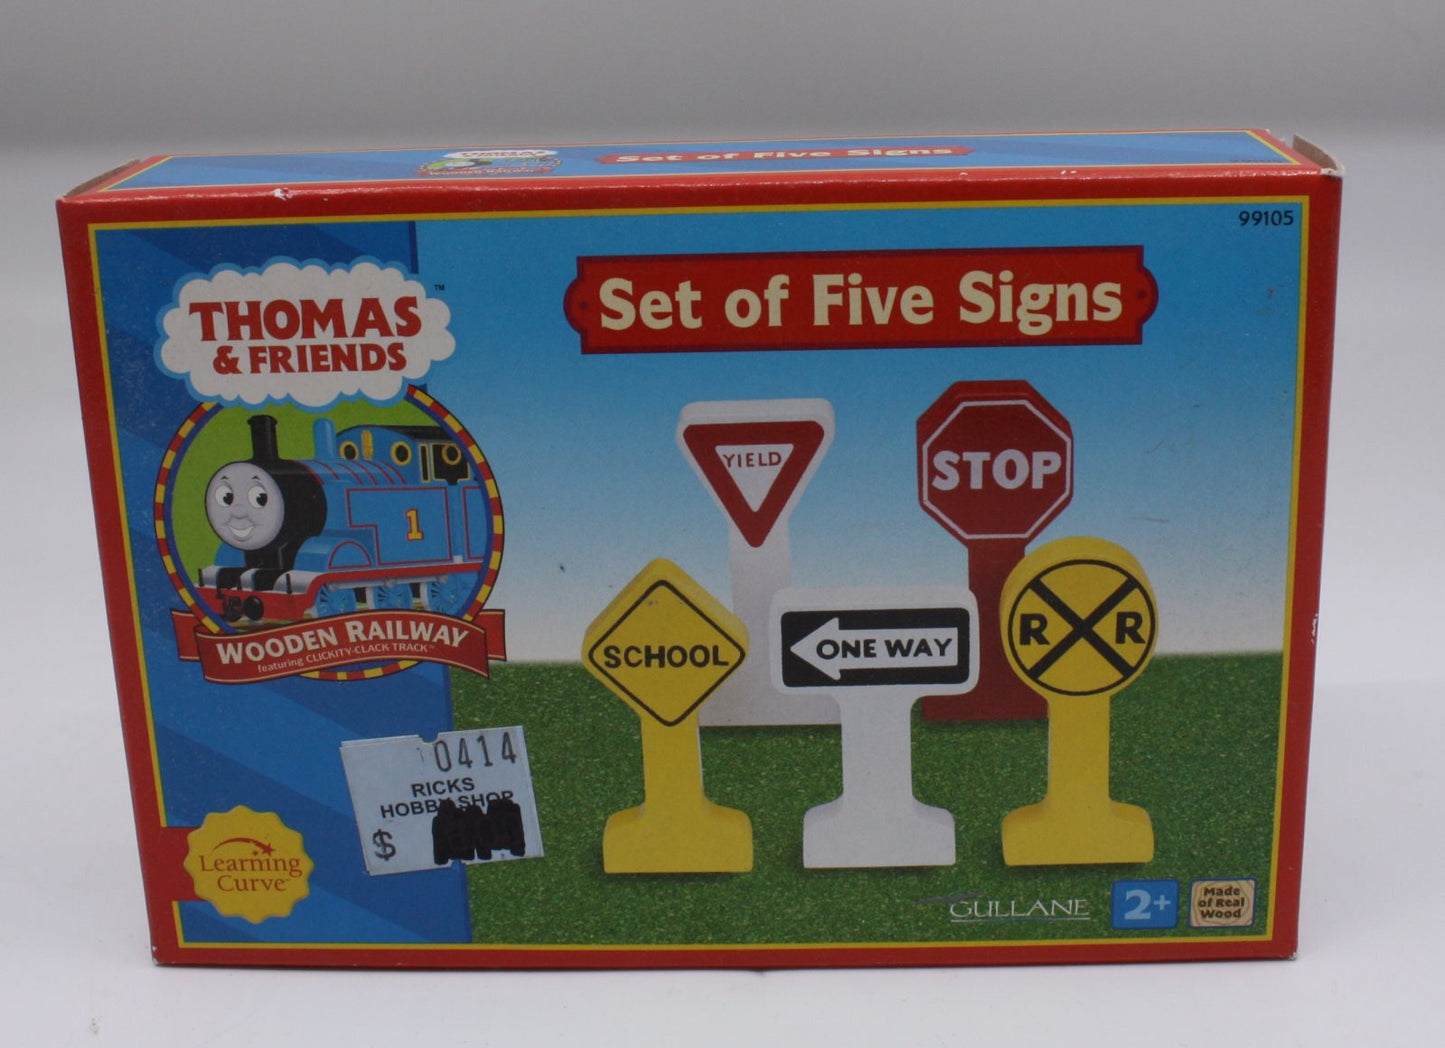 Learning Curve 99105 Thomas and Friends Set of Five Signs